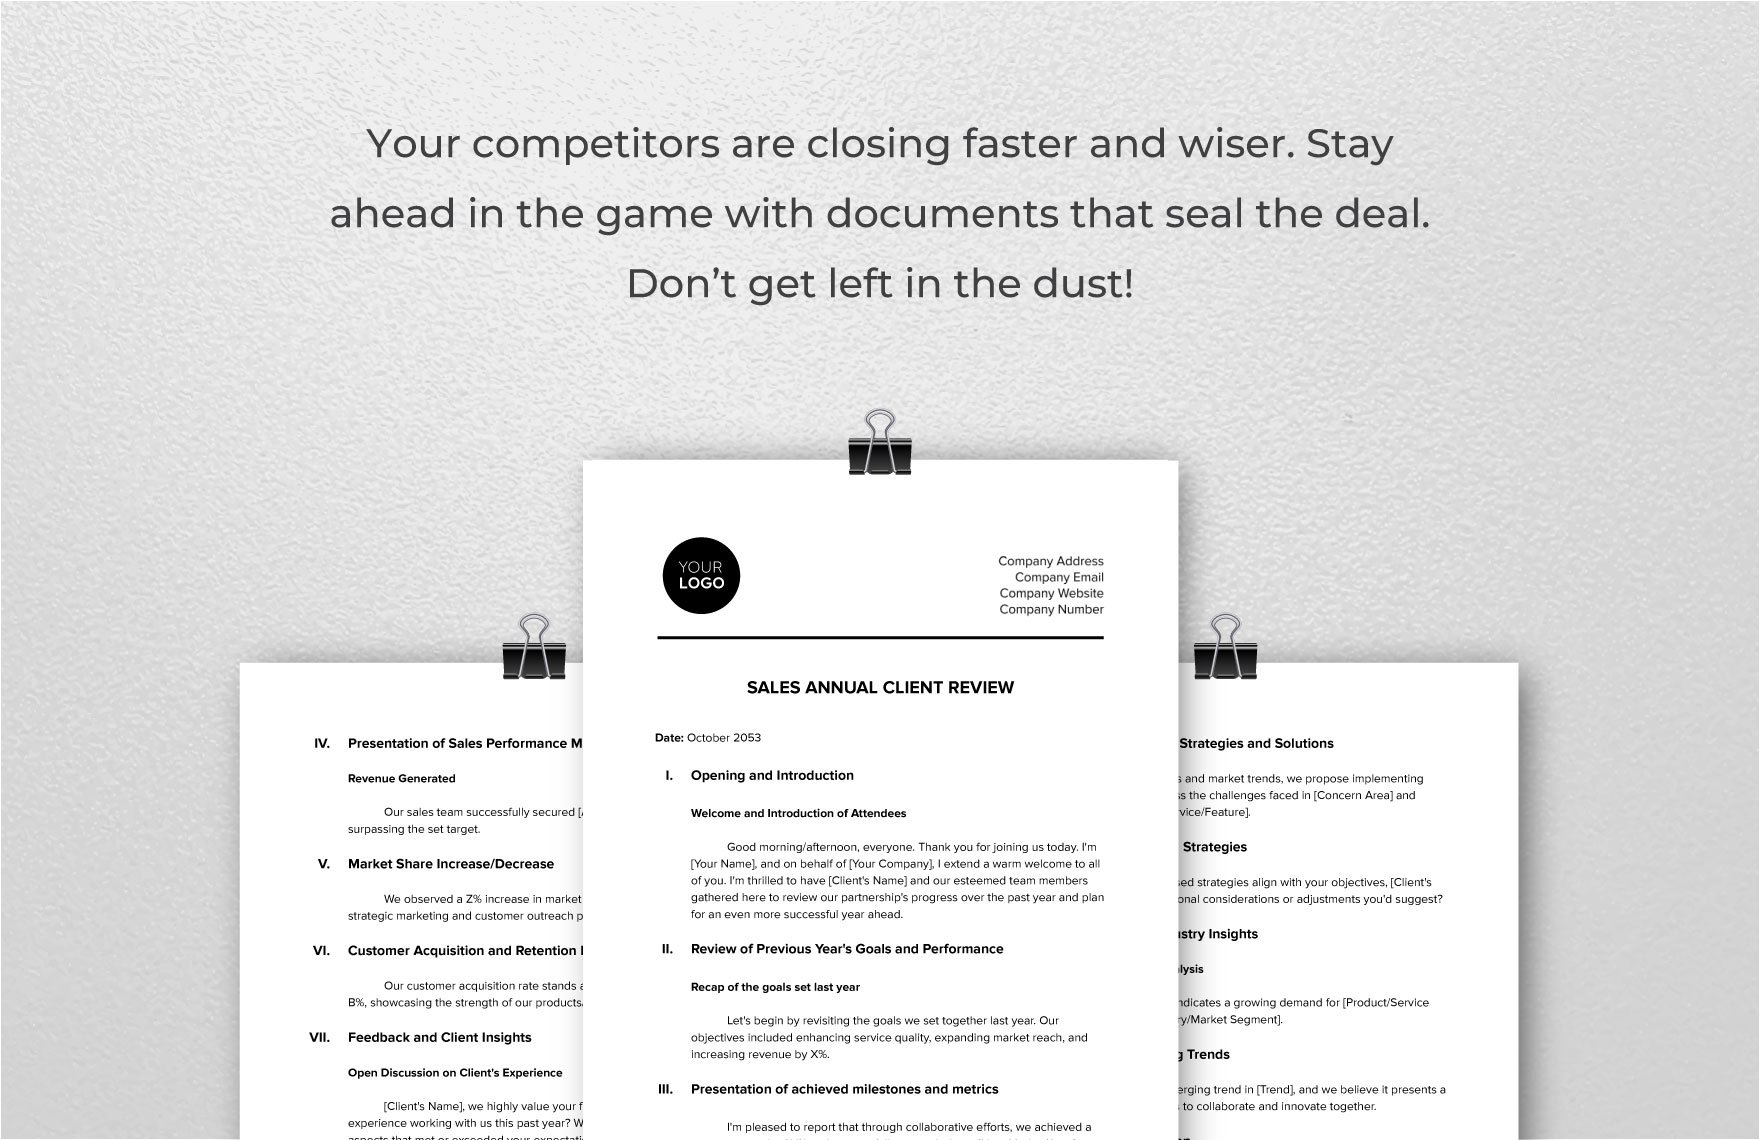 Sales Annual Client Review Template